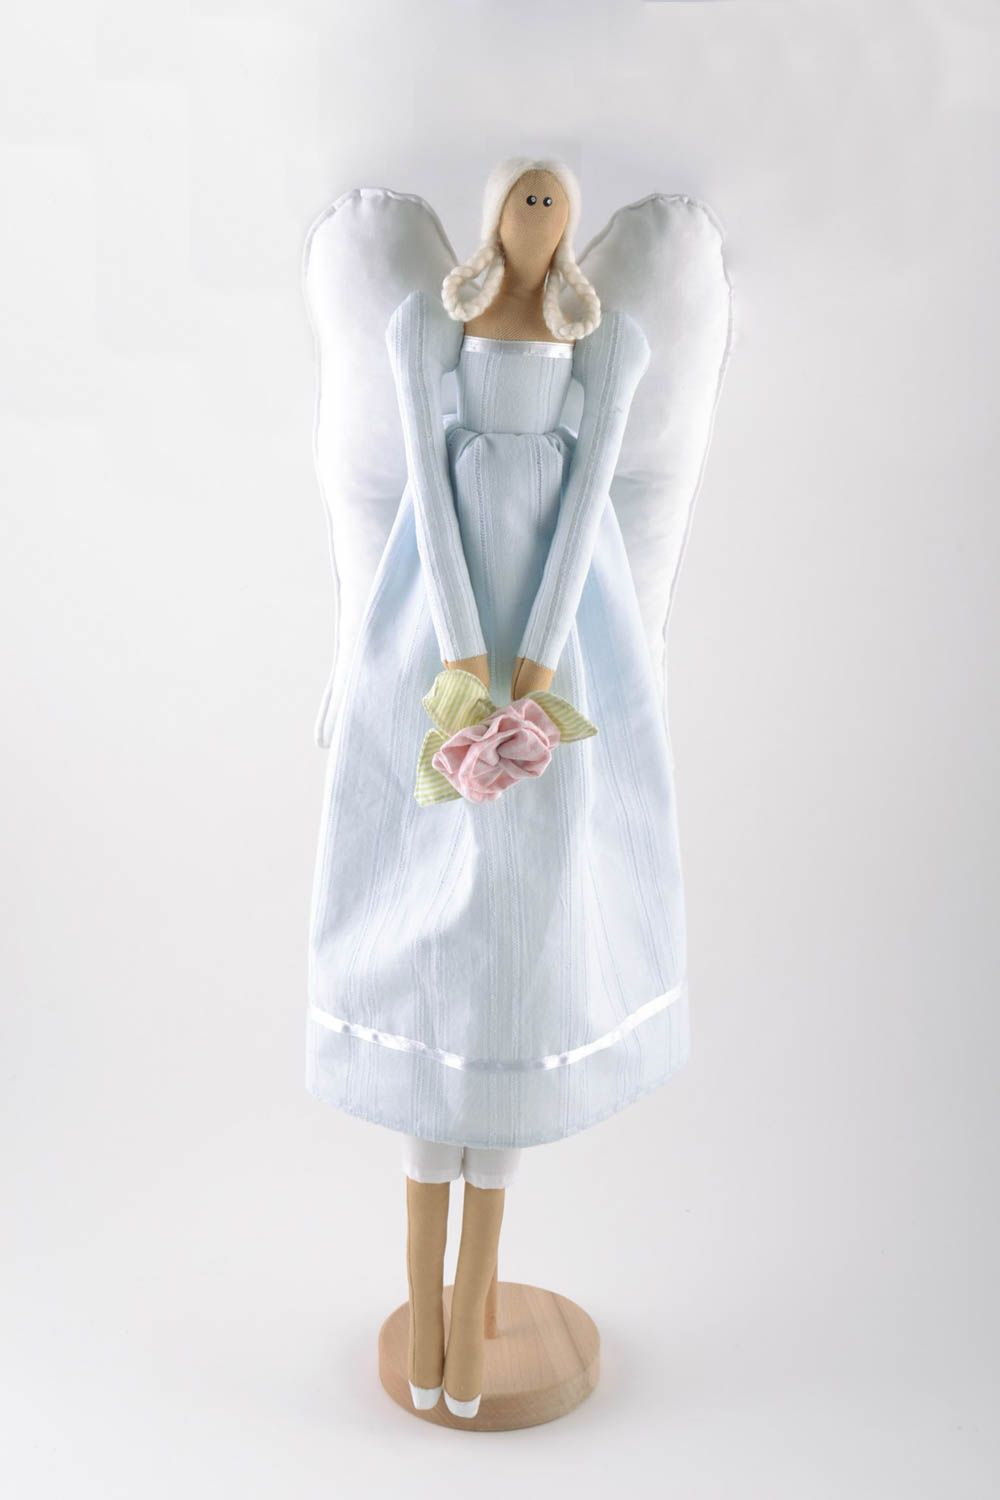 Handmade designer soft toy fairy in tender blue dress with wooden stand photo 5